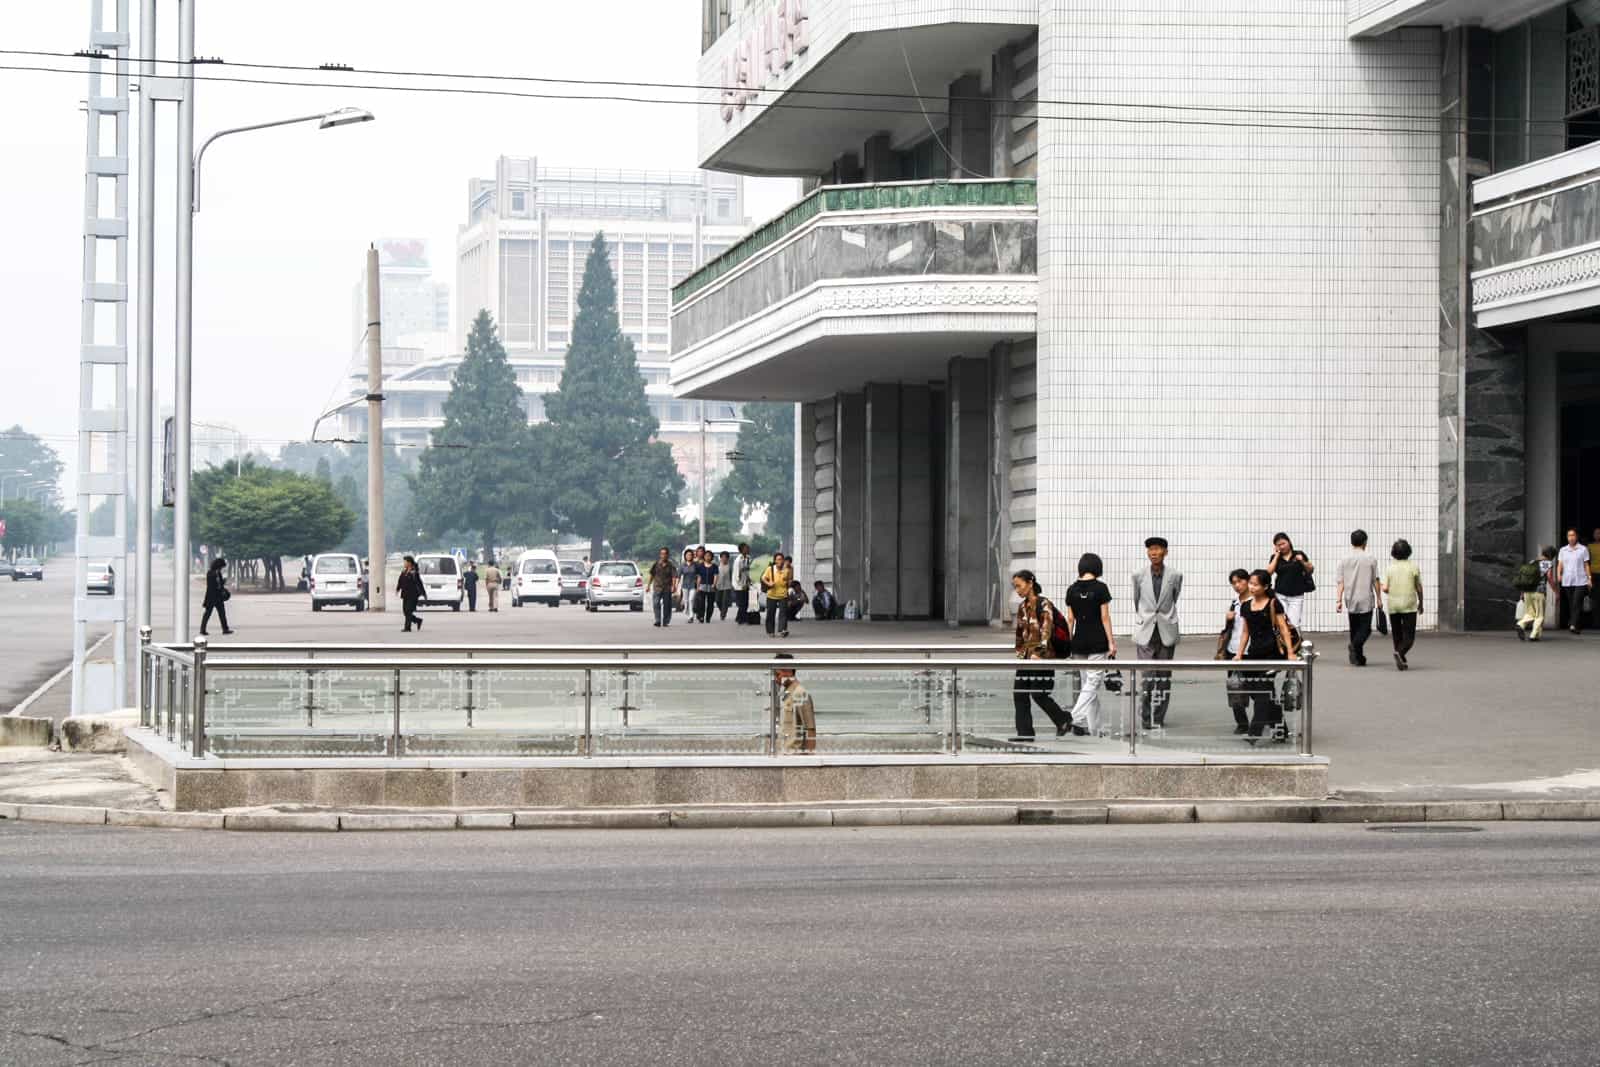 Local people on the streets in Pyongyang, North Korea